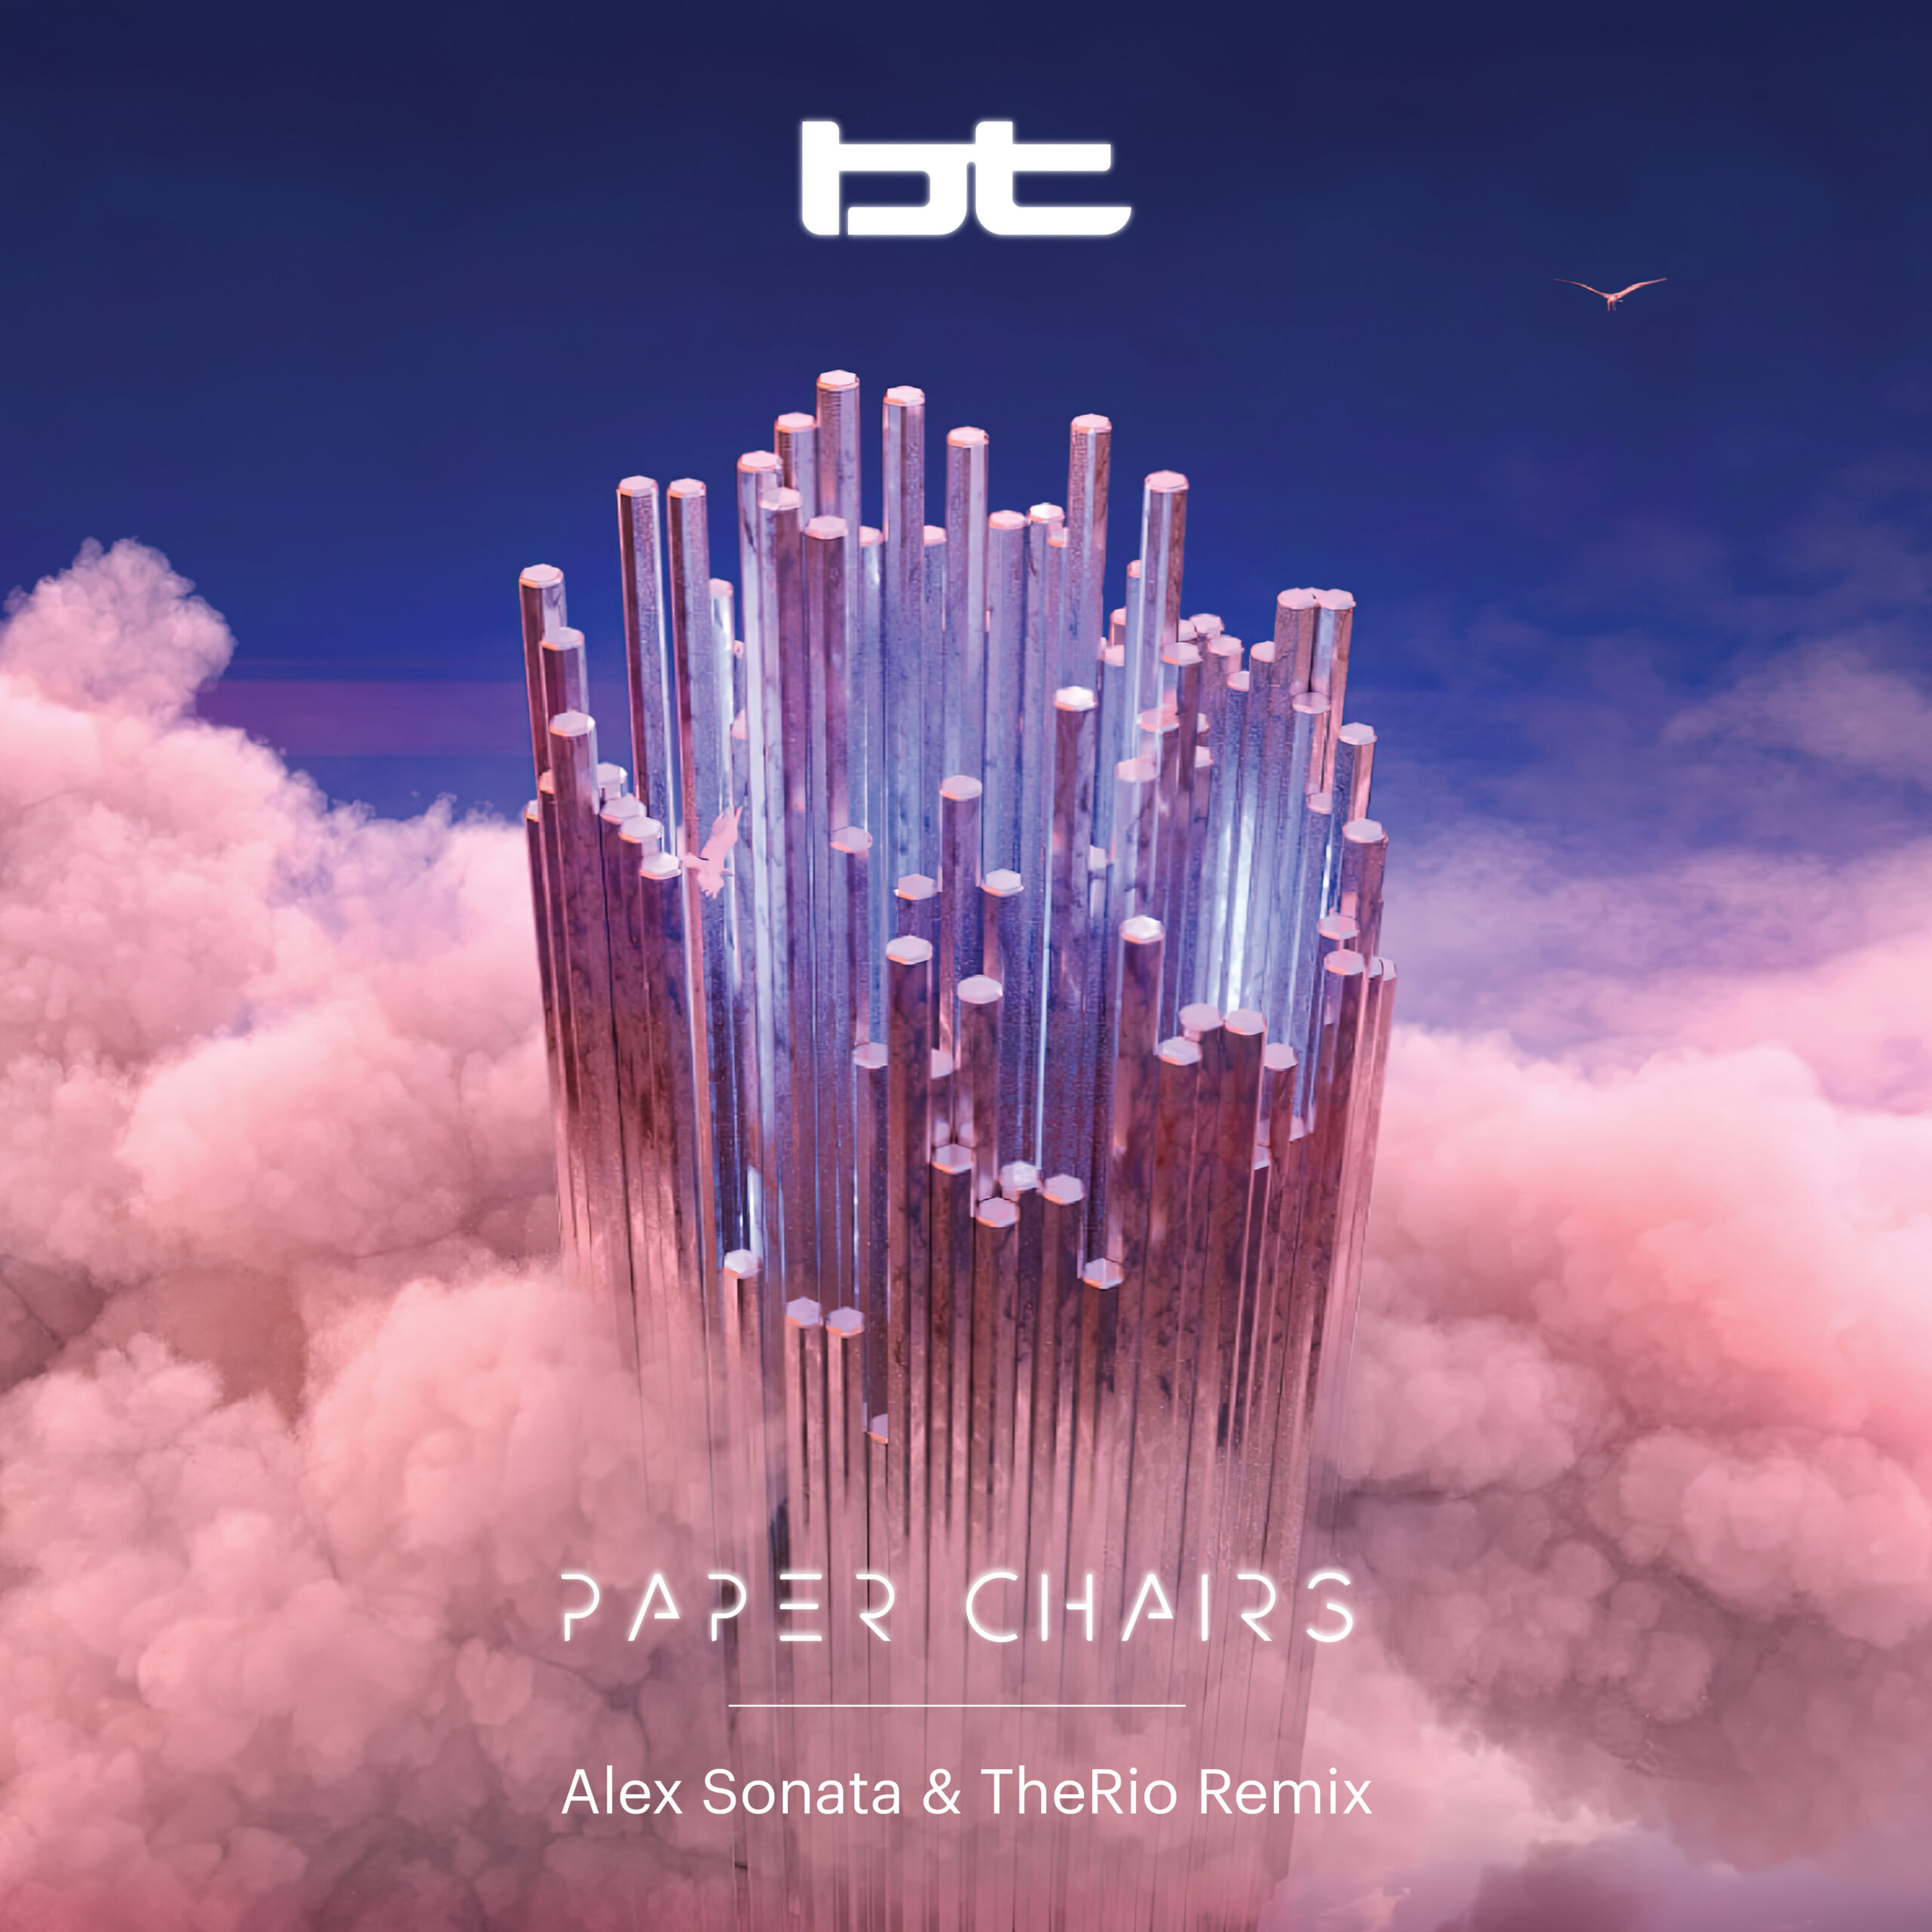 BT presents Paper Chairs (Alex Sonata & TheRio Remix) on Black Hole Recordings